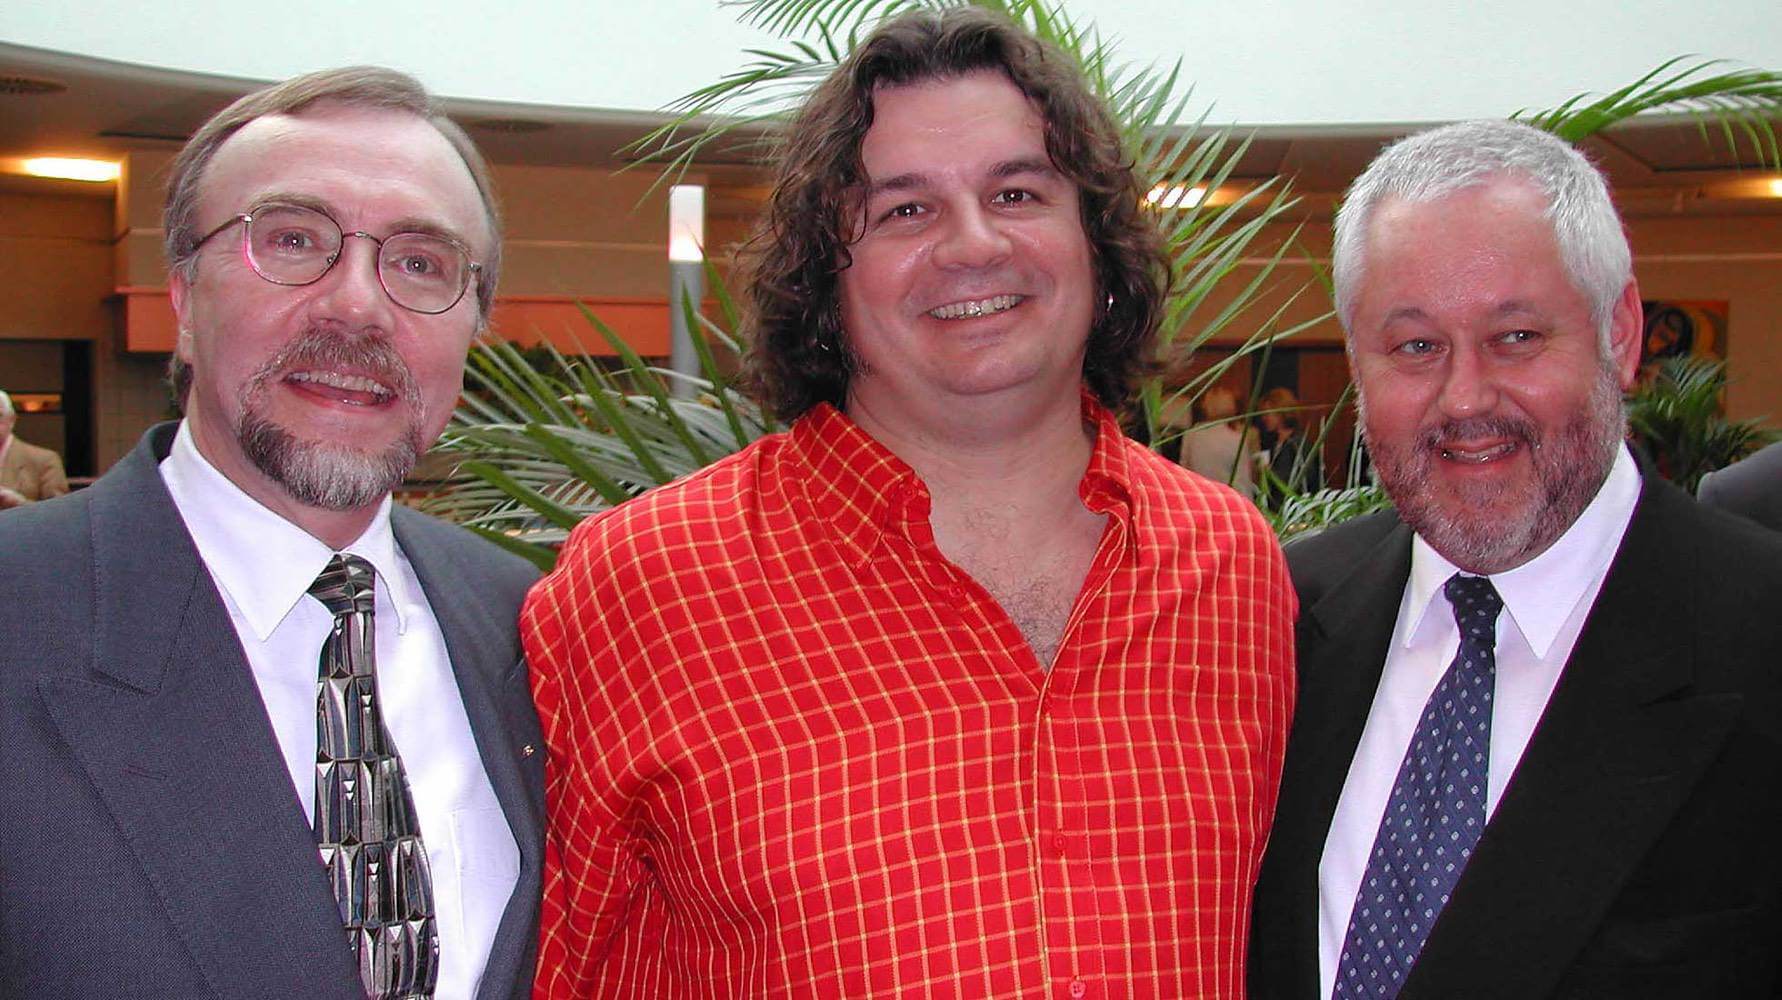 Photo of artist Michael J. Korber at his Gala Event at Club Monet in Luxembourg City, with Gerald J. Loftus, Ambassador from the United States Embassy, and Paul Schoemenberg Chairman of the A.S.B.I Luxembourg